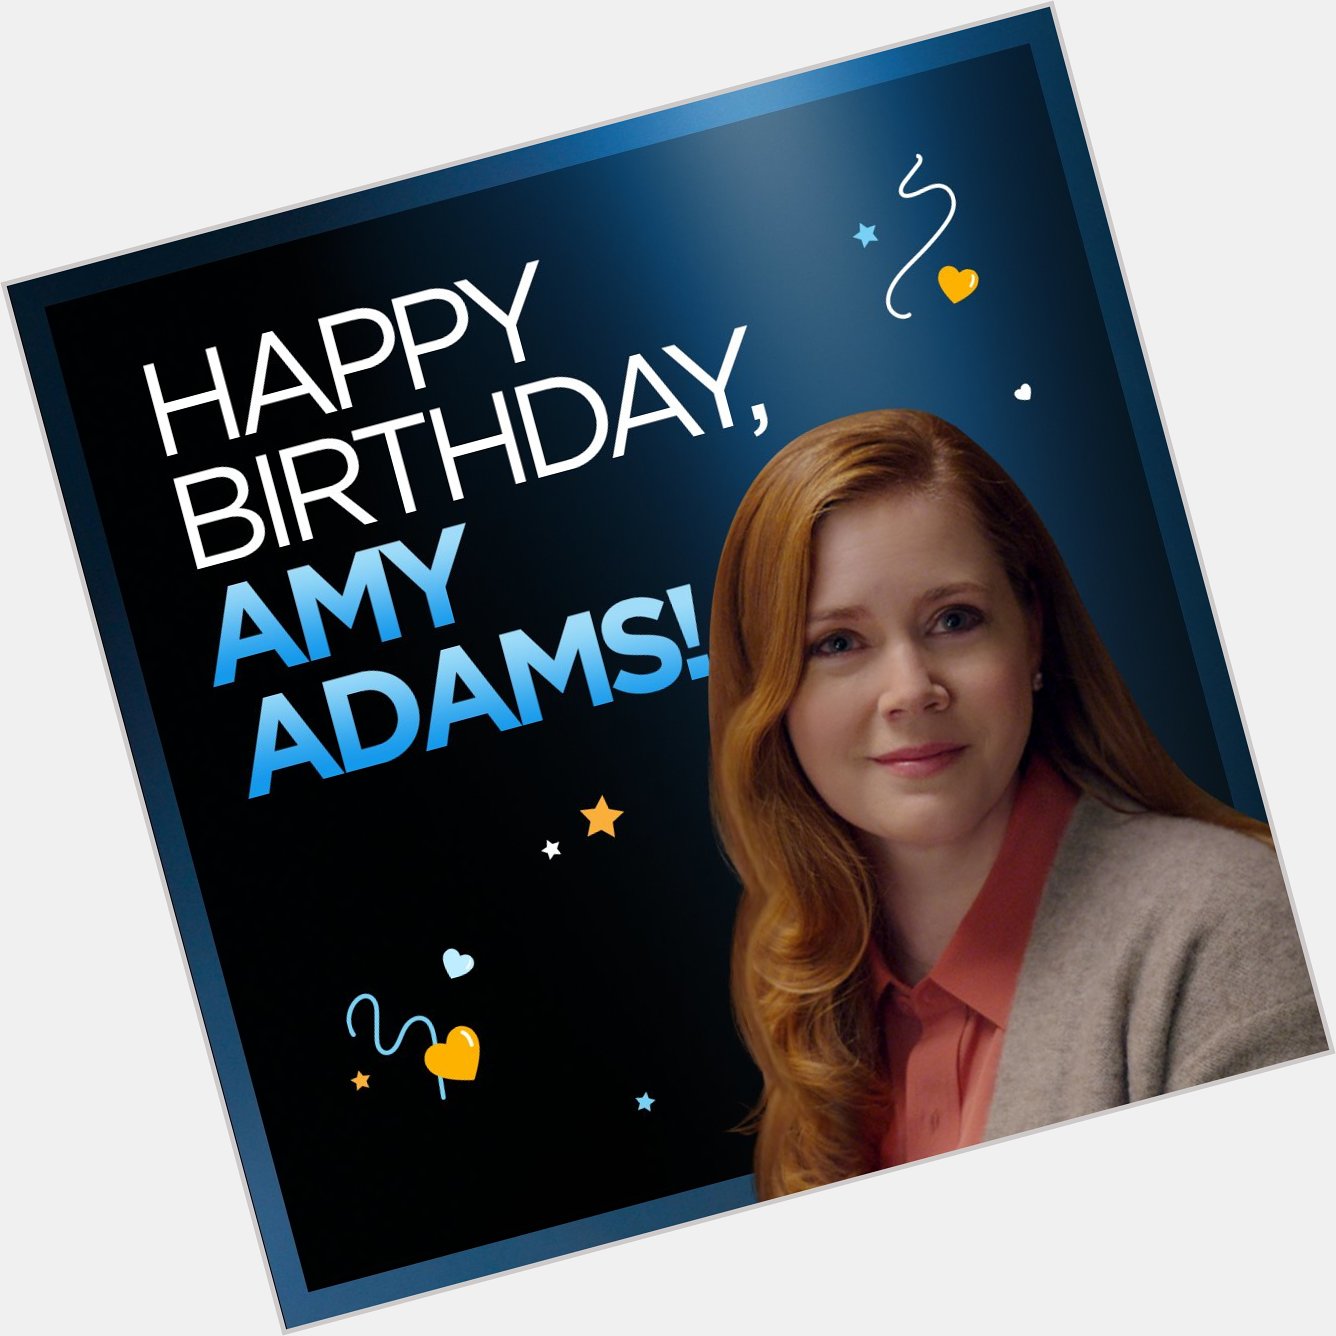 Happy Birthday Amy Adams, our Cynthia Murphy in Have an amazing day 